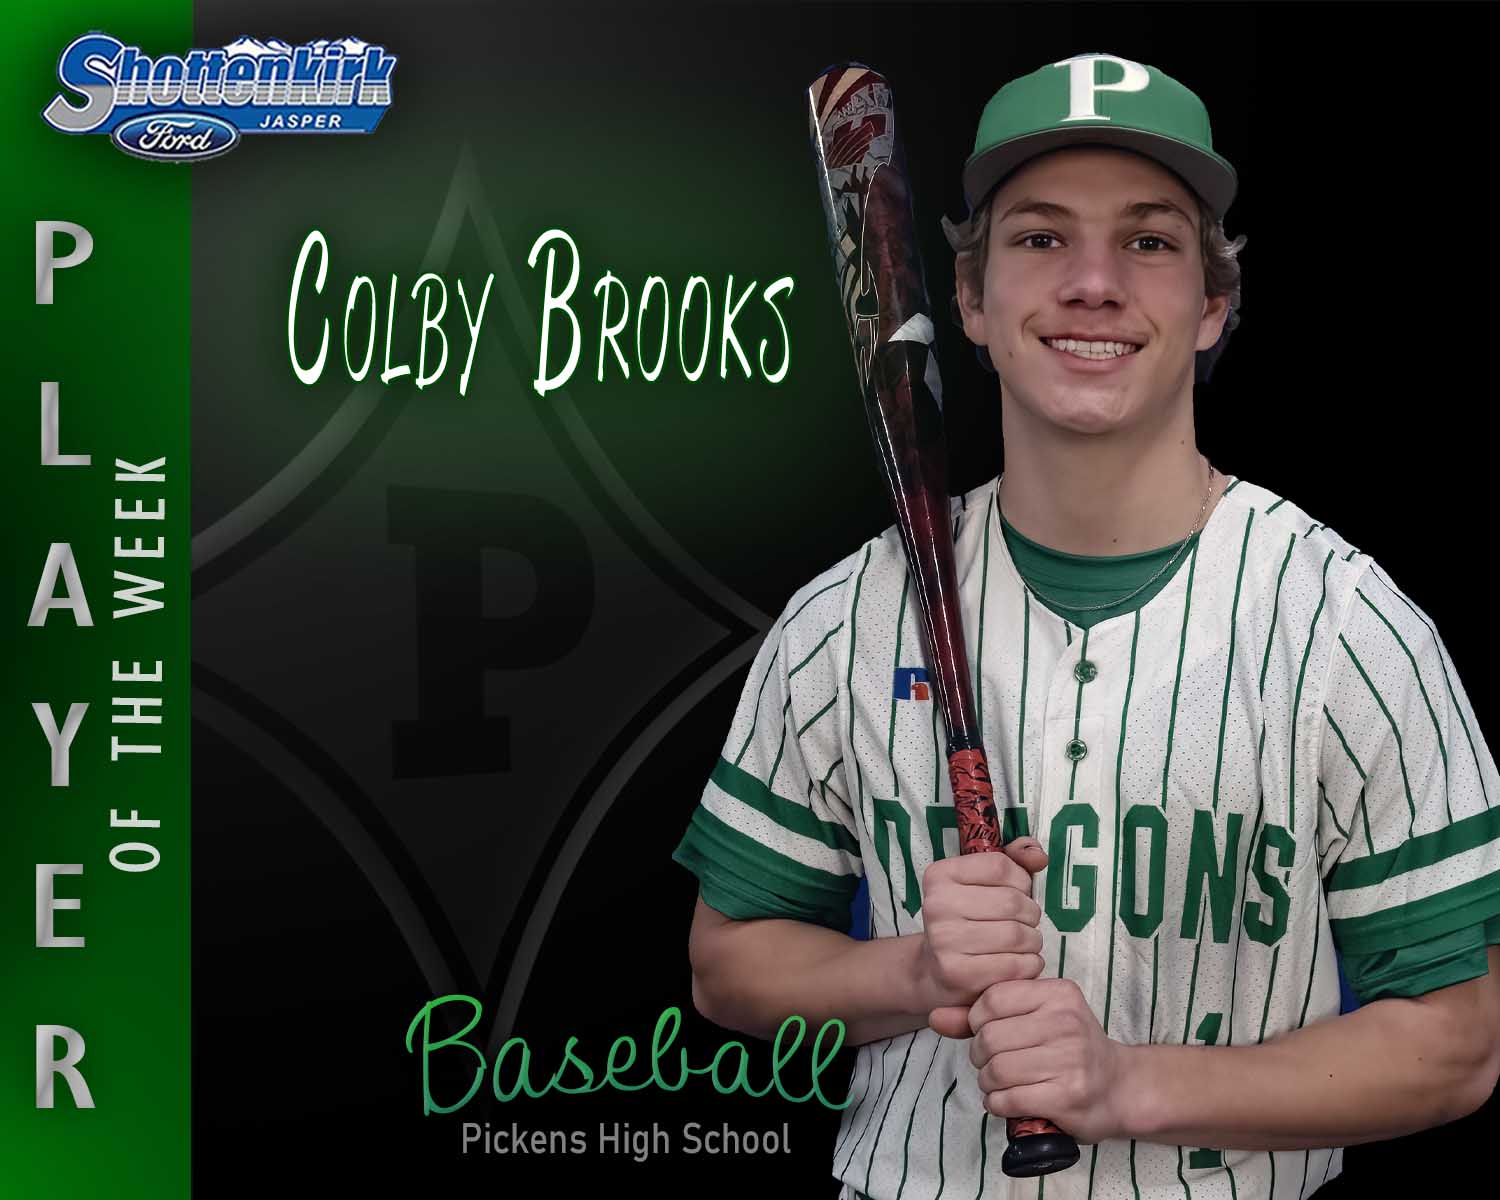 PHS Baseball Player of the Week #5 - Colby Brooks